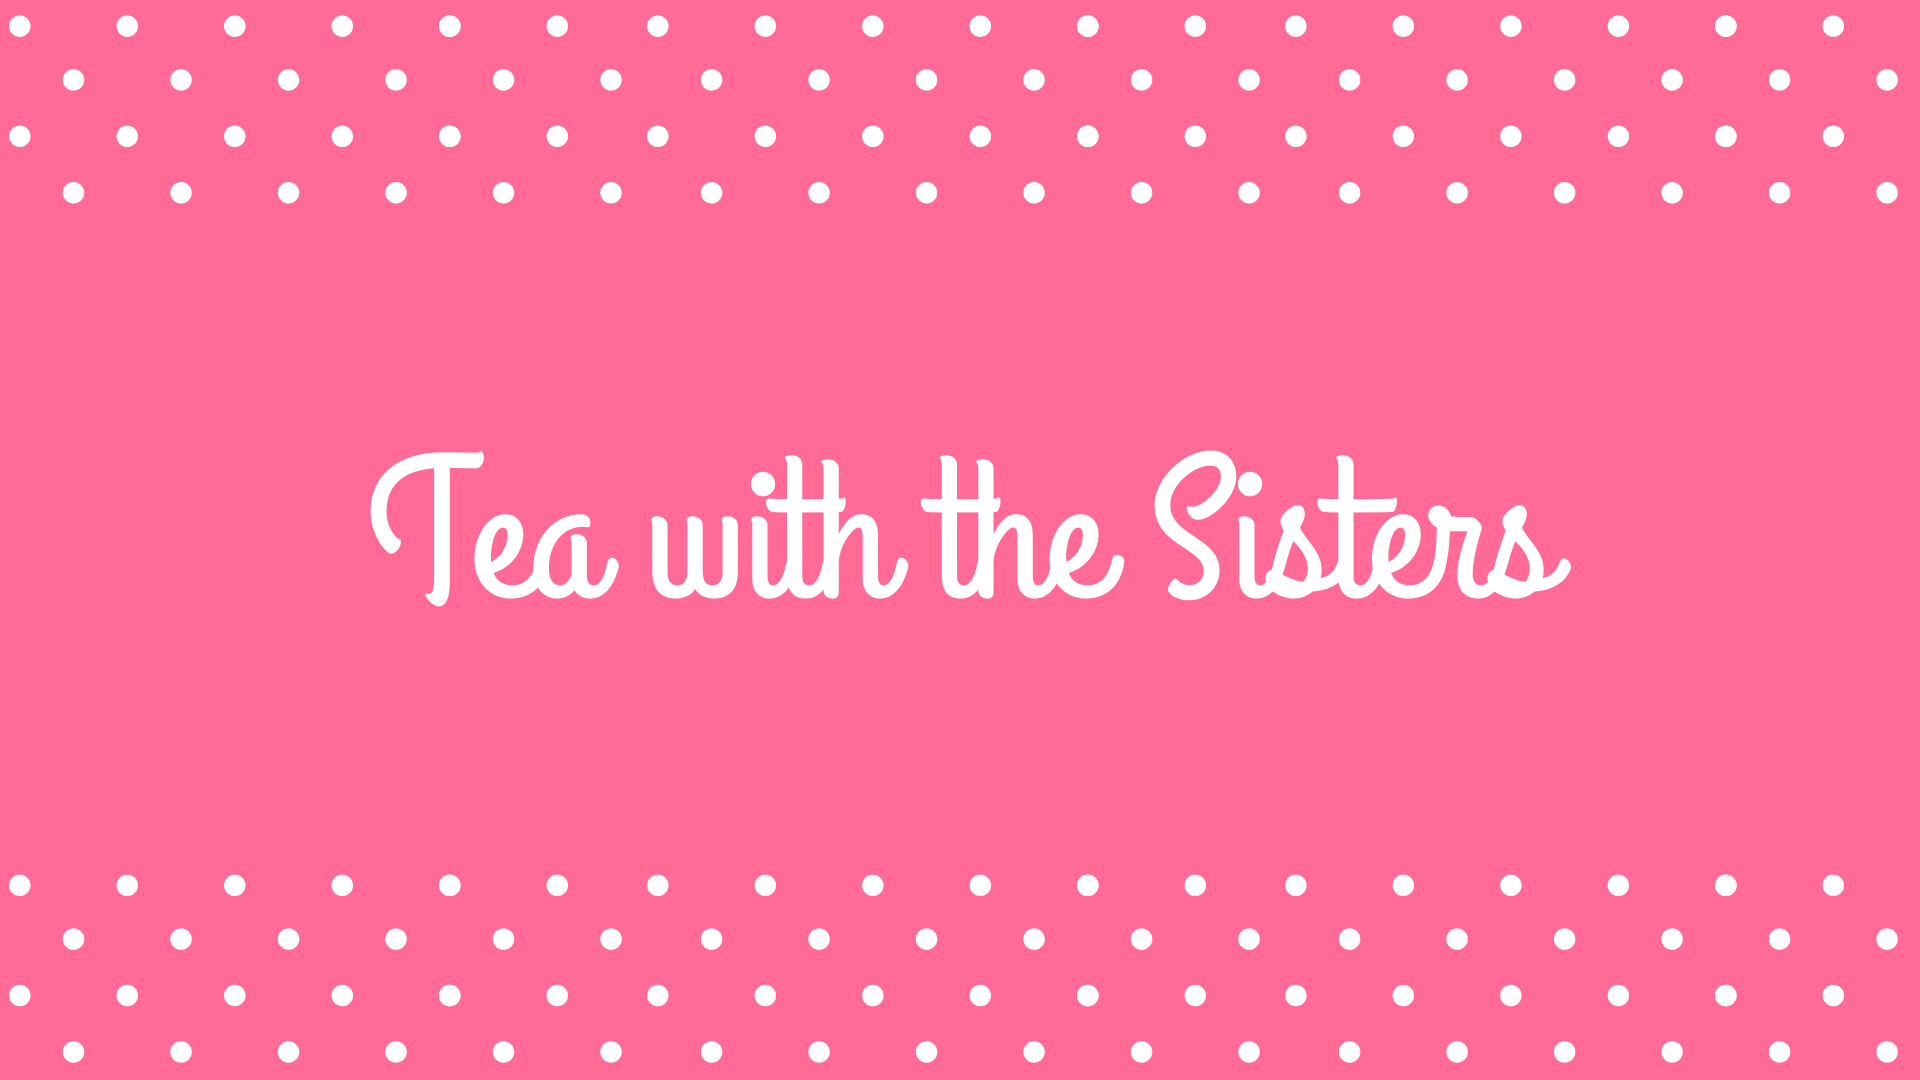 Tea with the Sisters